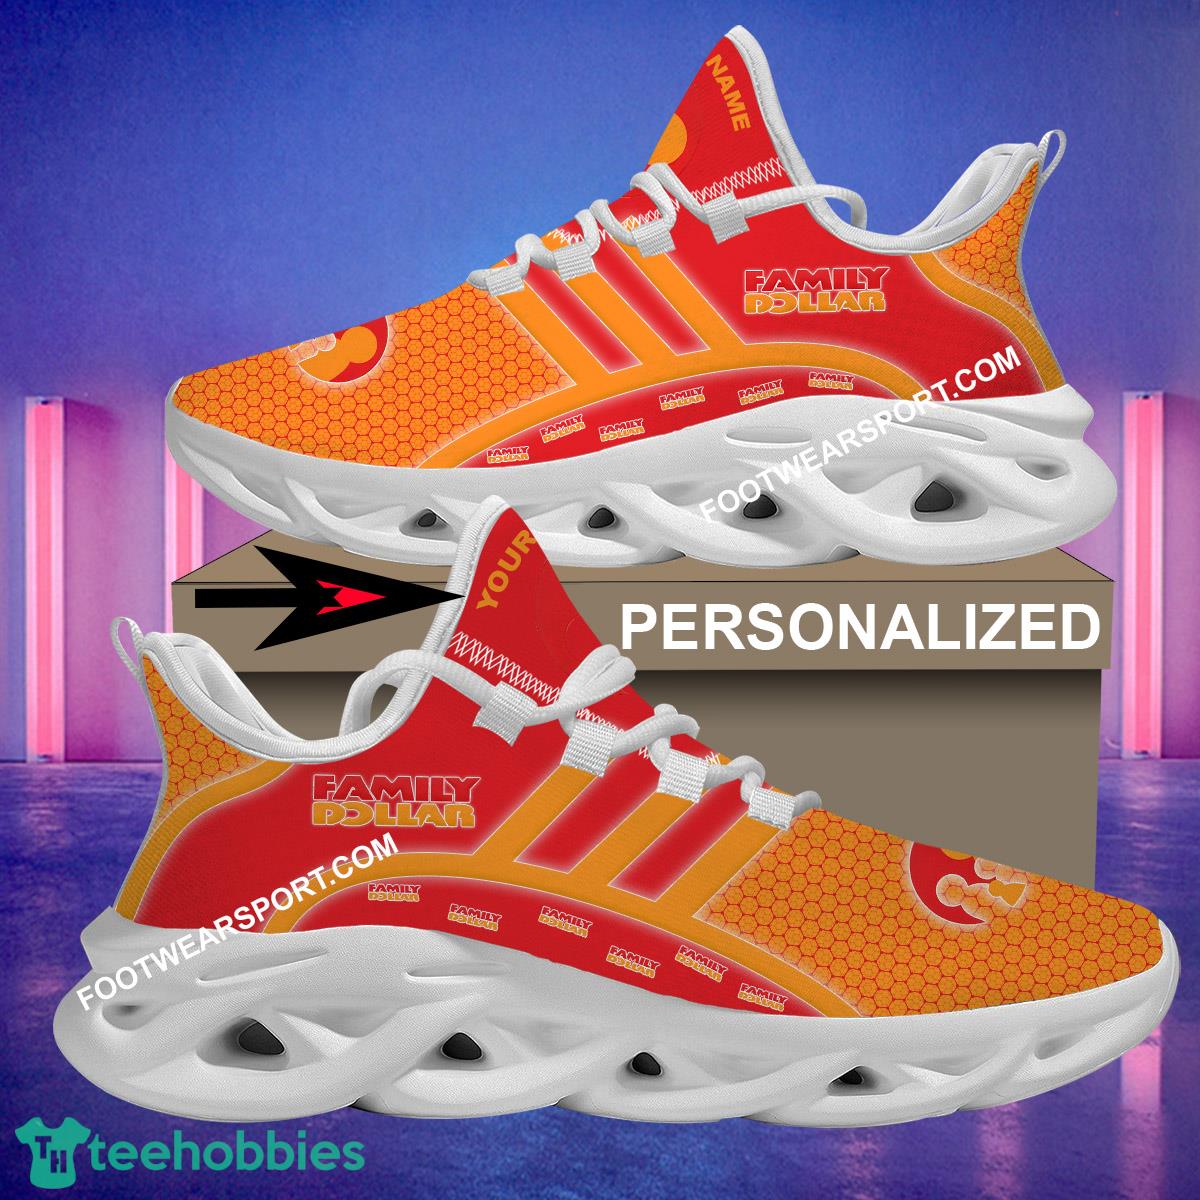 Family Dollar Max Soul Shoes Brand For Fans Gift Motif Chunky Sneaker Custom Name Max Soul Shoes - Family Dollar Brand Max Soul Sneaker Personalized_1